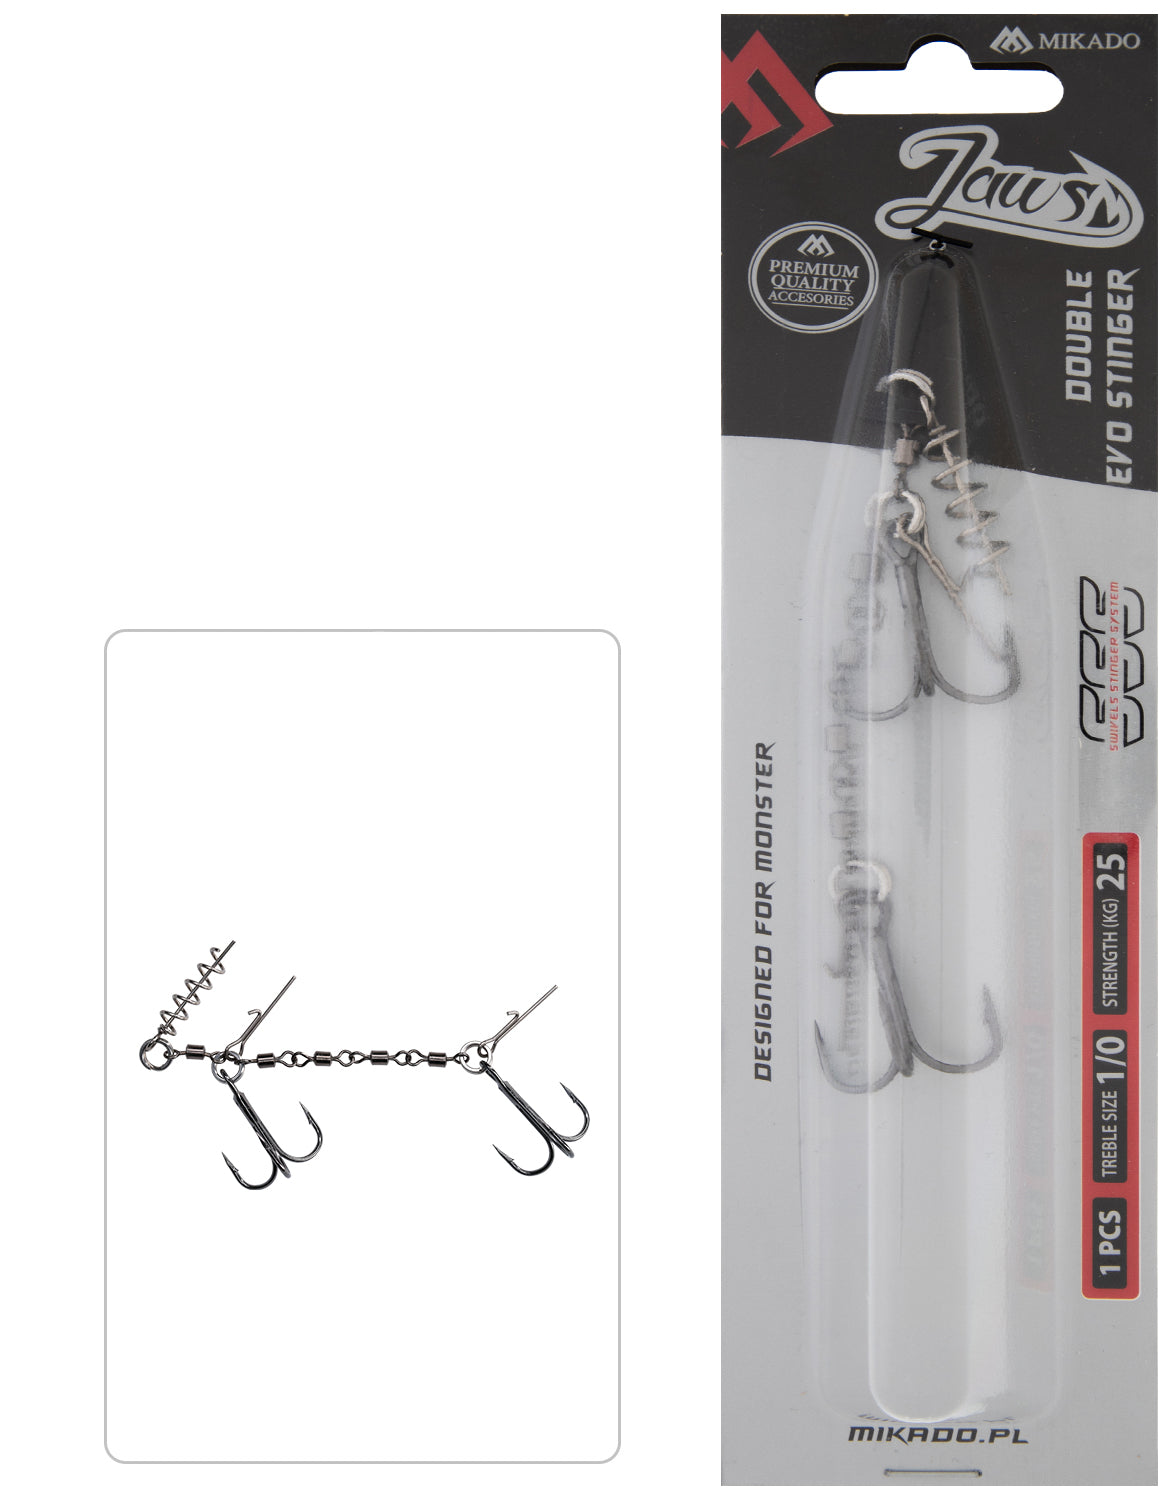 Fishing Rig Accessories - Stinger Rigs, Glass Rattles, Corkscrews, Wire  Leaders